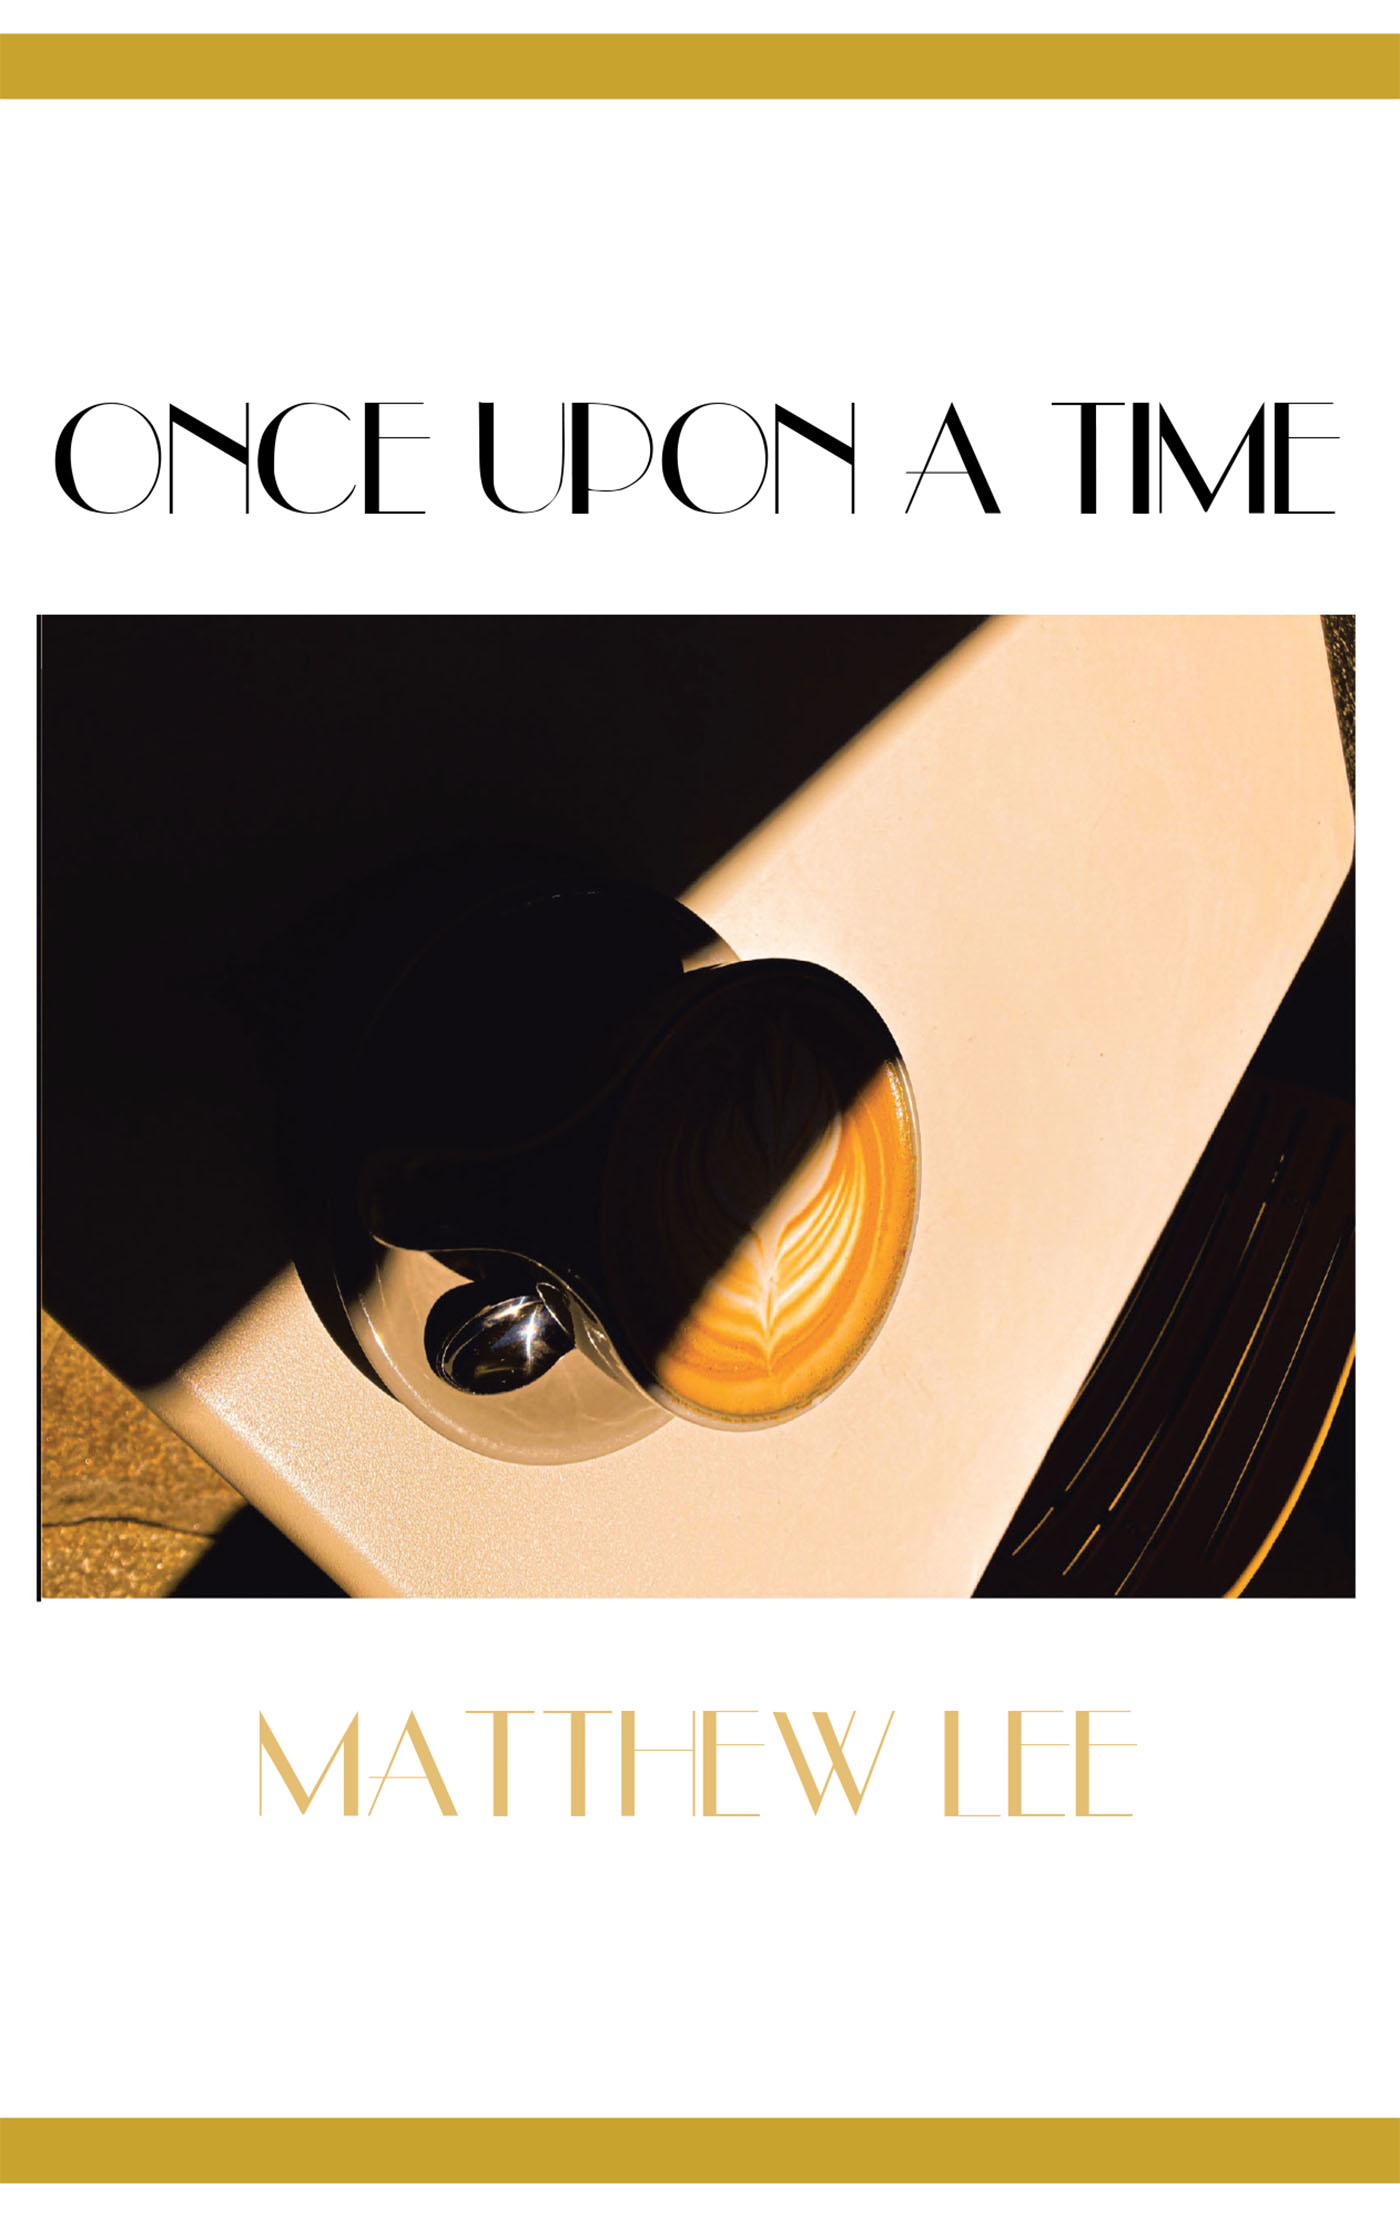 Matthew Lee’s Newly Released "Once Upon a Time" is a Poignant Reflection on Life, Love, and Faith with a Thoughtful Comparison to Familiar Biblical Themes